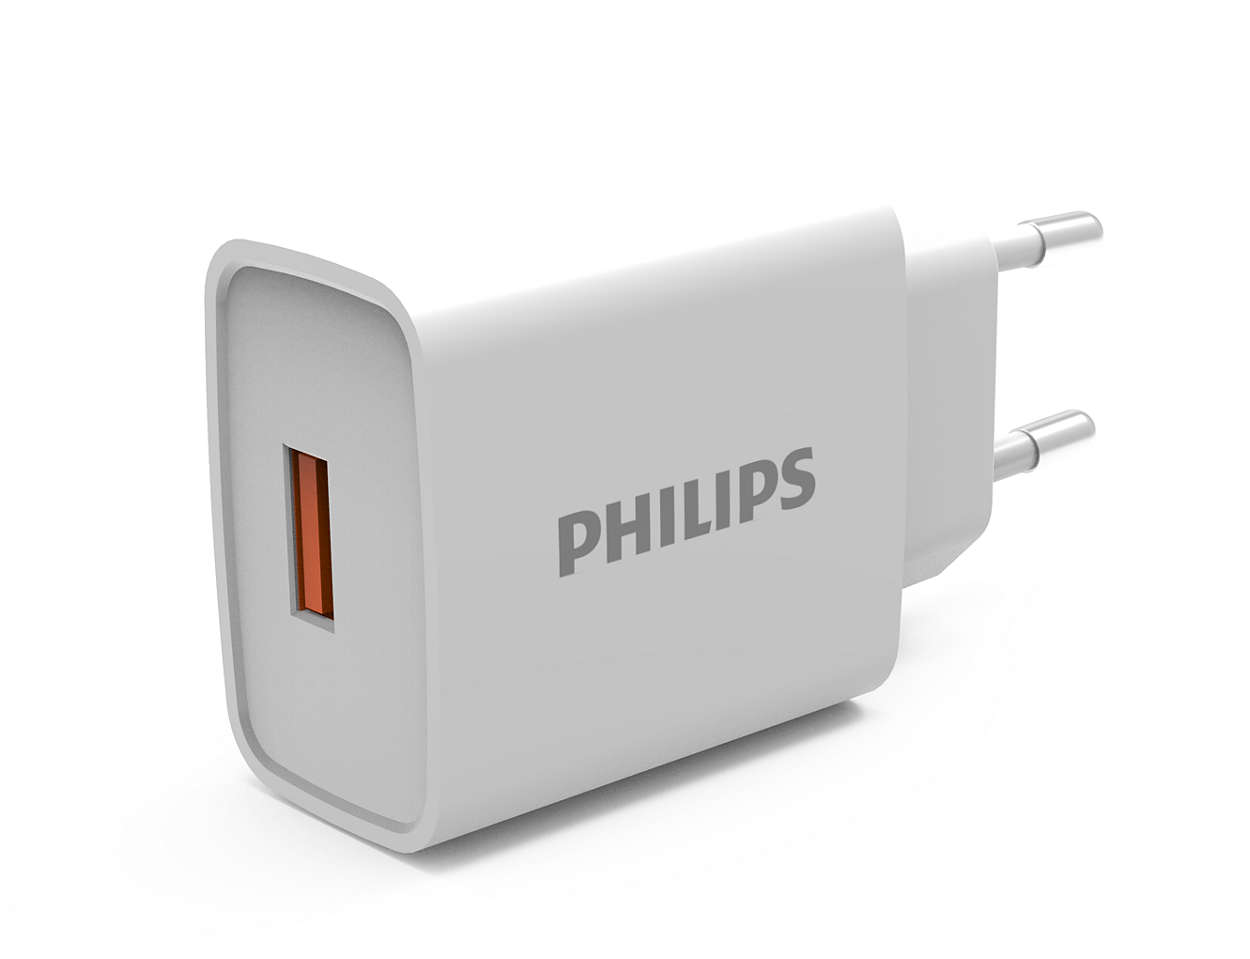 Wall charger with USB-A port